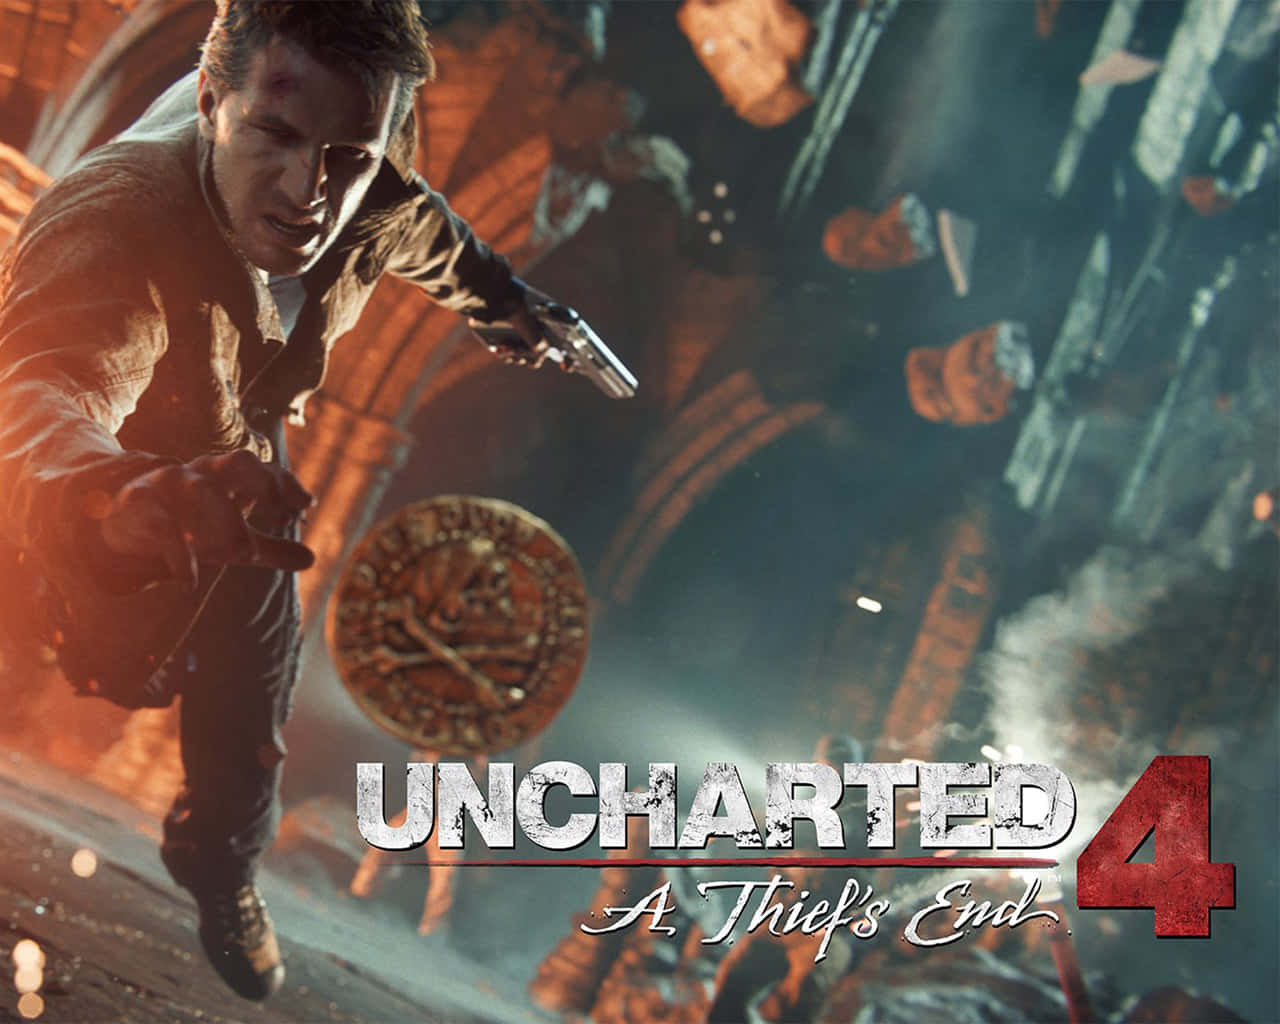 Nathan Drake races through a perilous jungle in Uncharted 4 Wallpaper